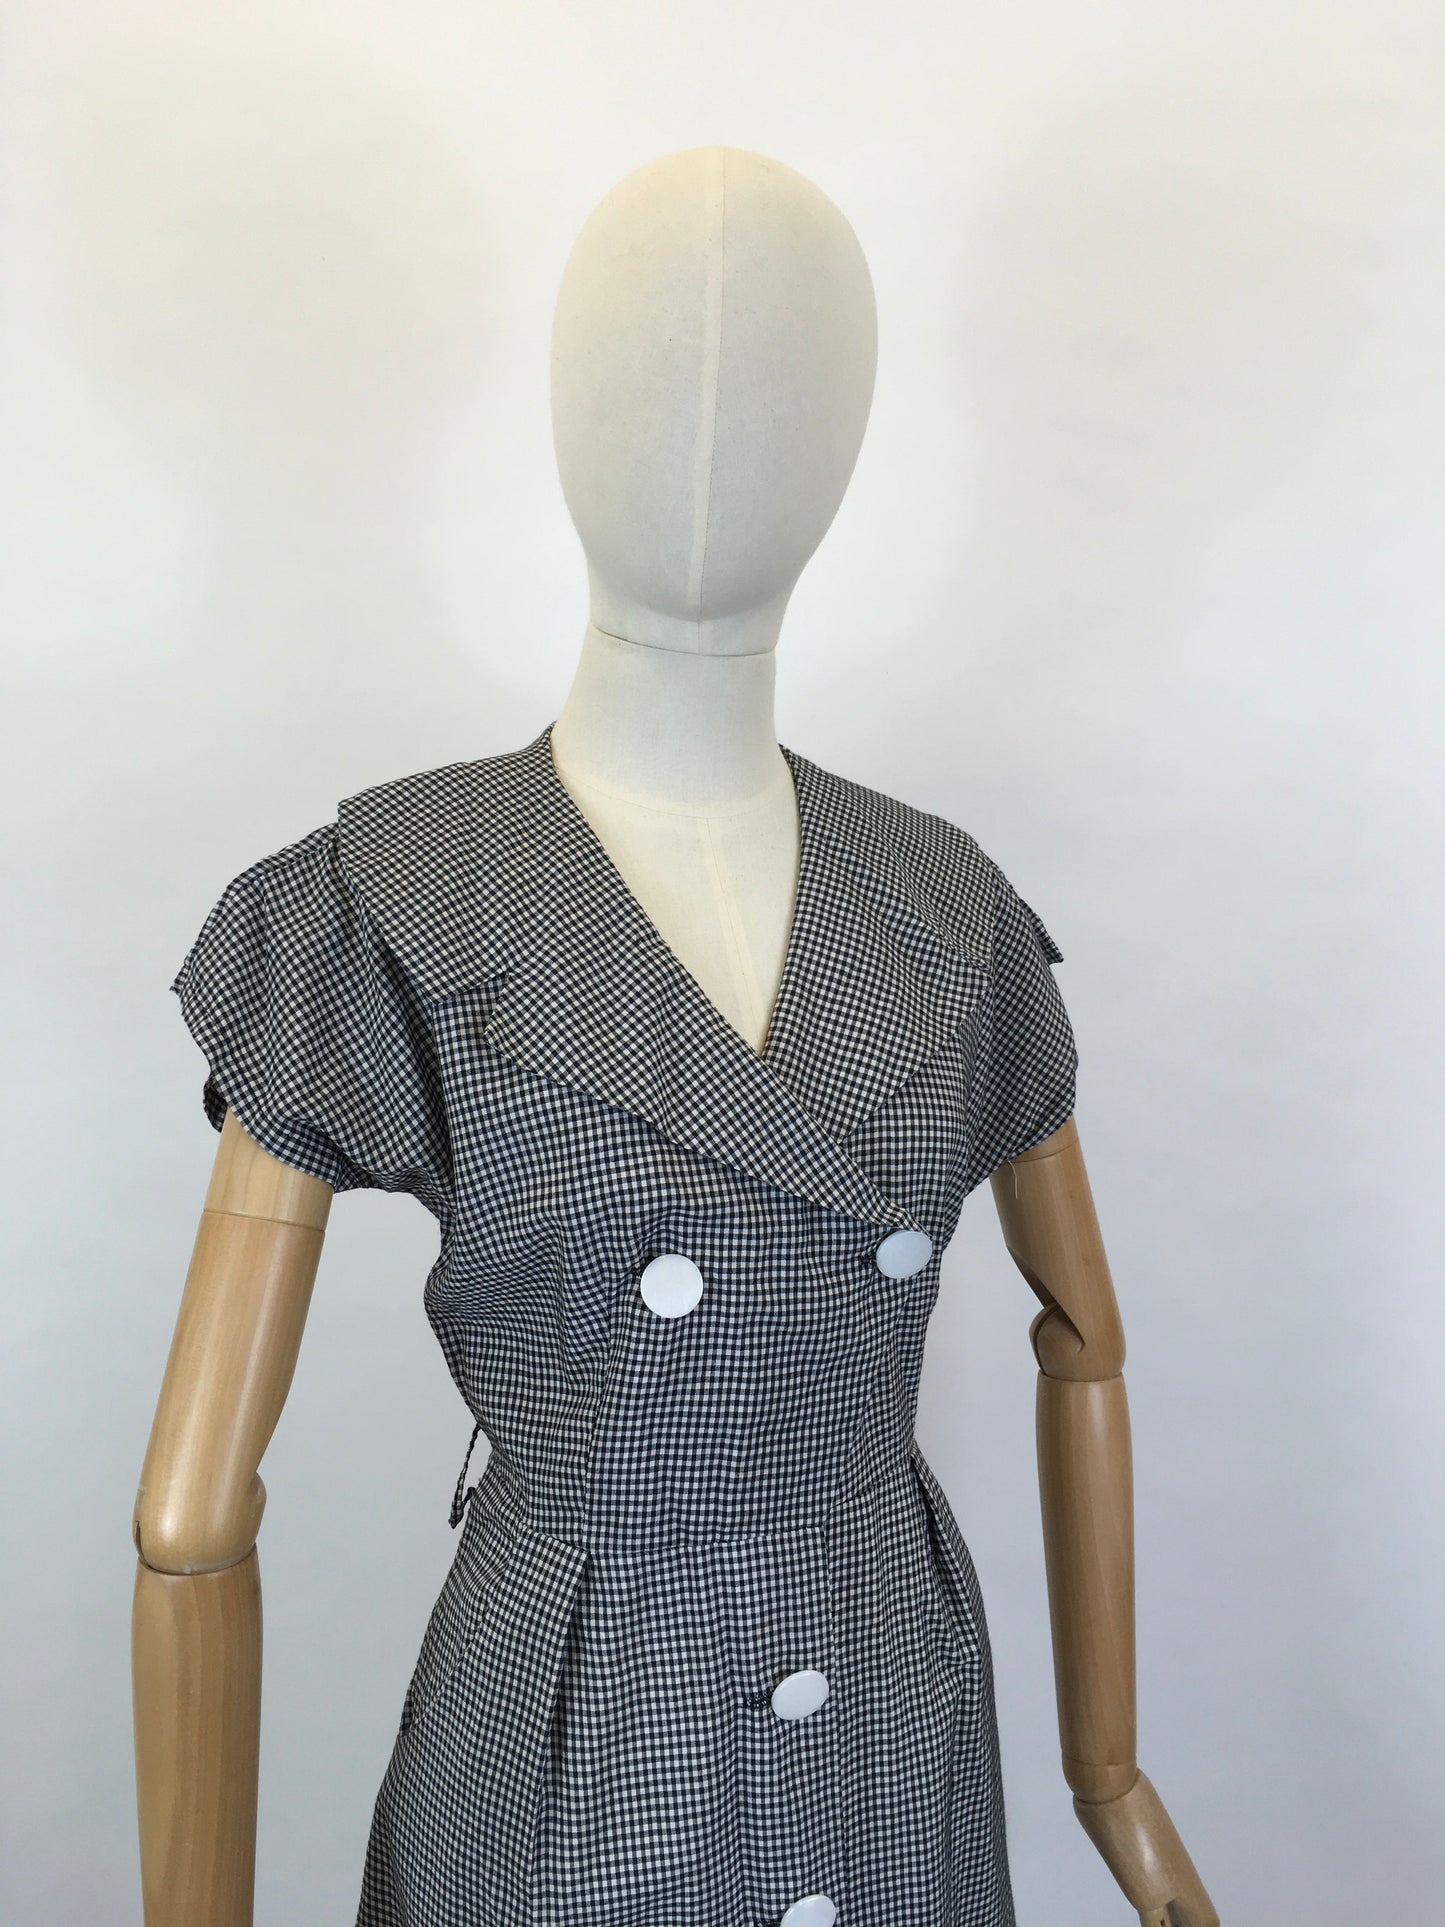 Original 1950’s Fabulous Cotton Day Dress - In A Black And White Gingham Check